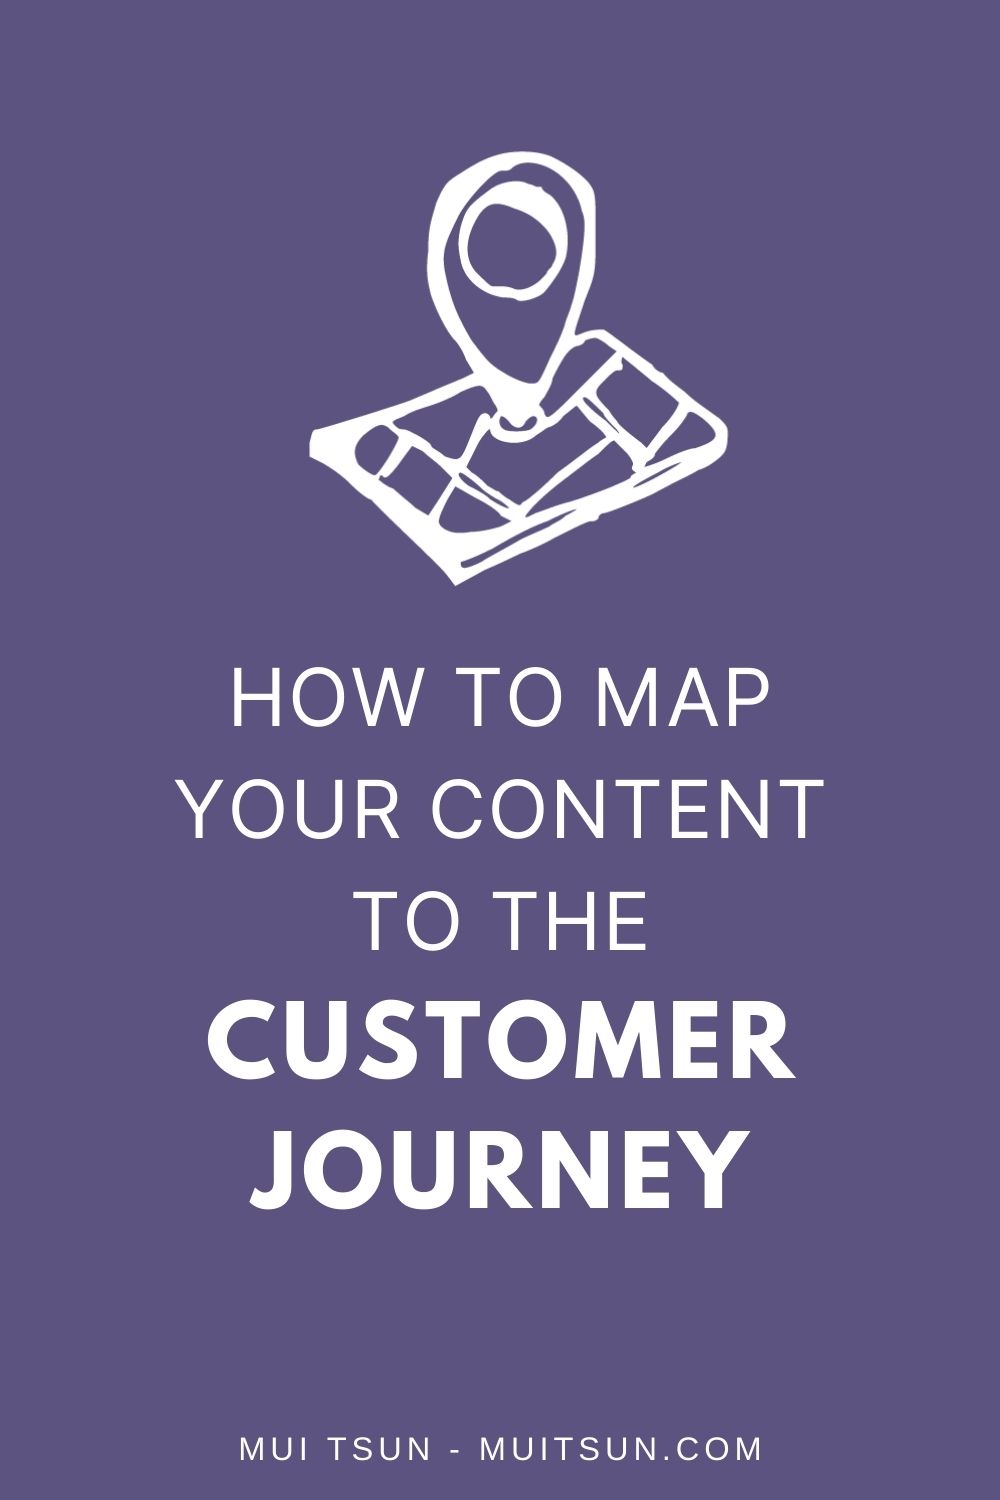 How to Map Your Content to the Customer Journey